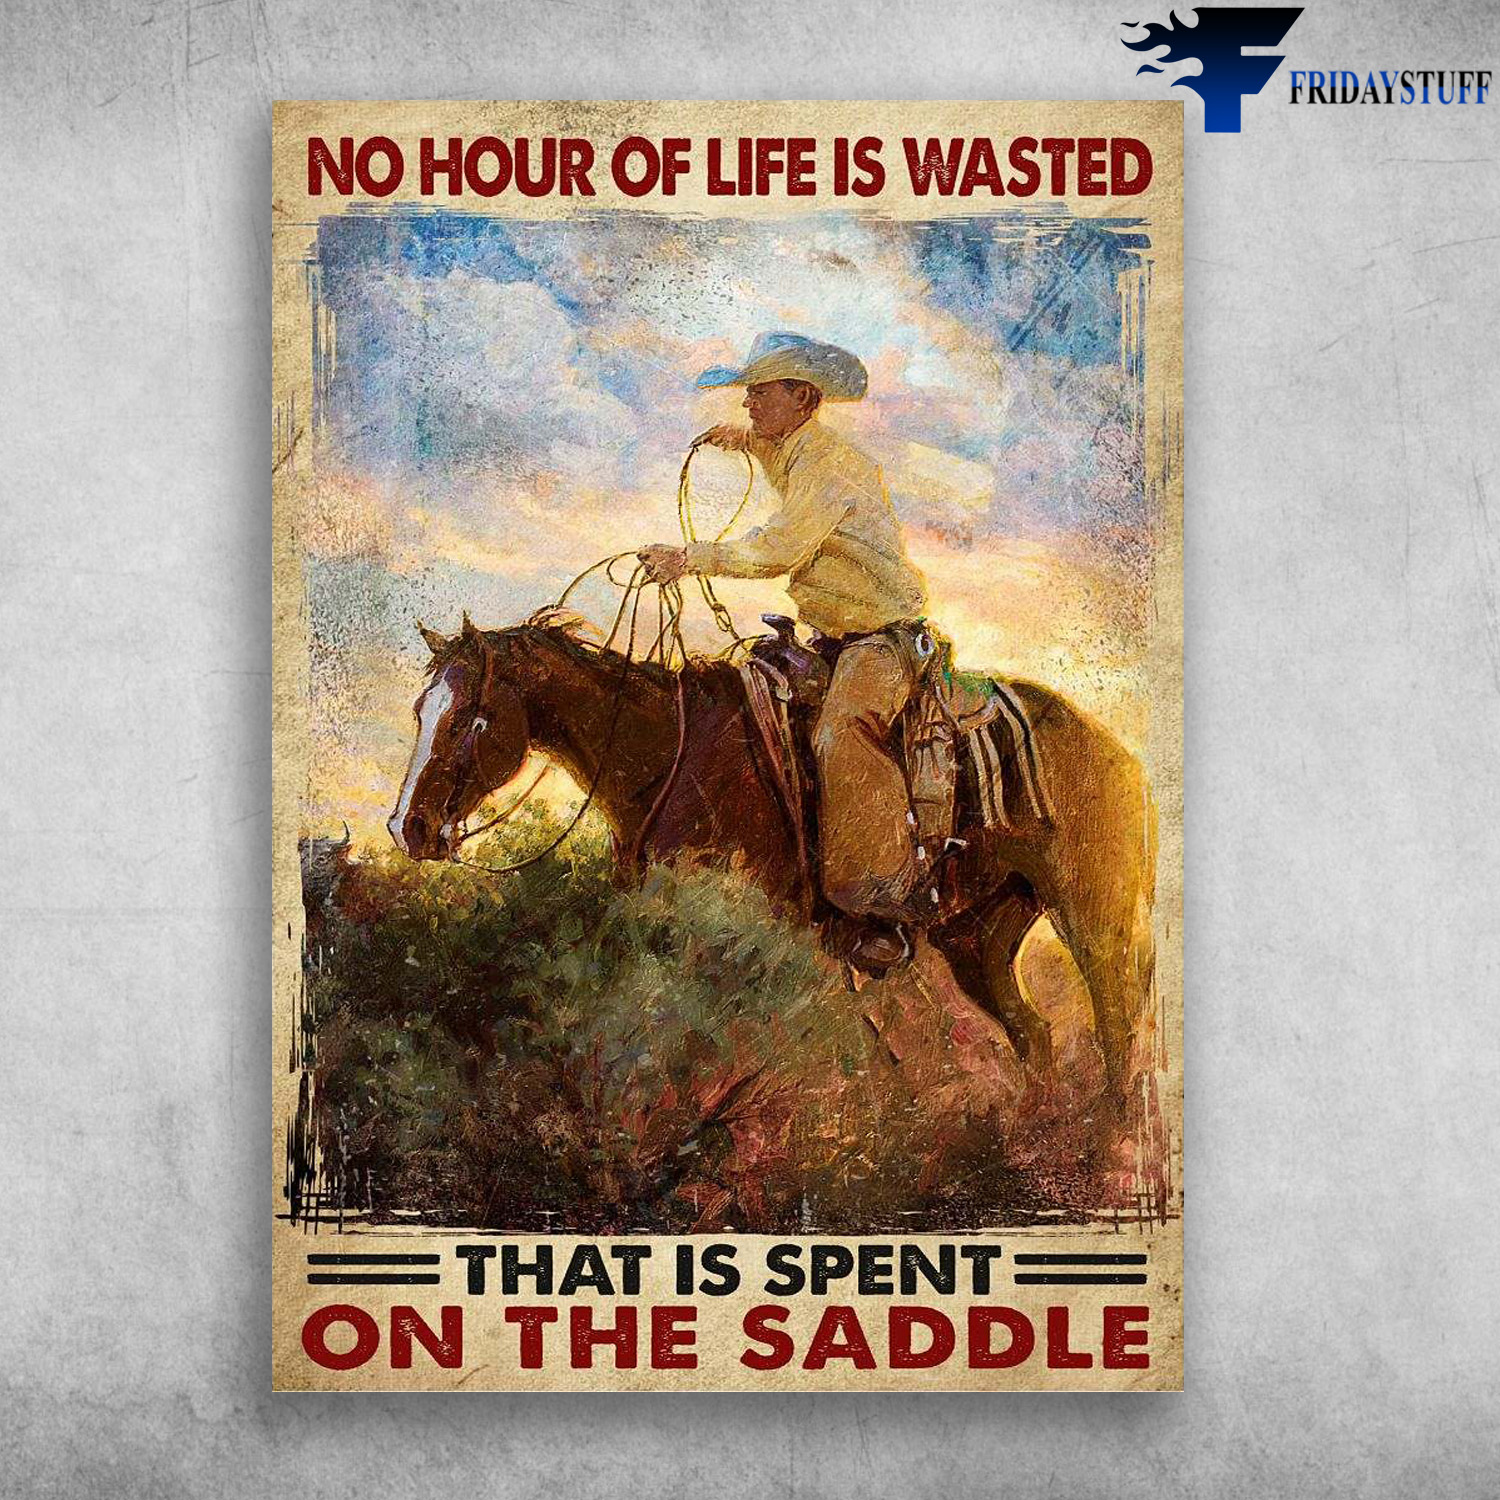 Cowboy Riding Horse - No Hour Of Life Is Wasted, That Is Spent On The Saddle